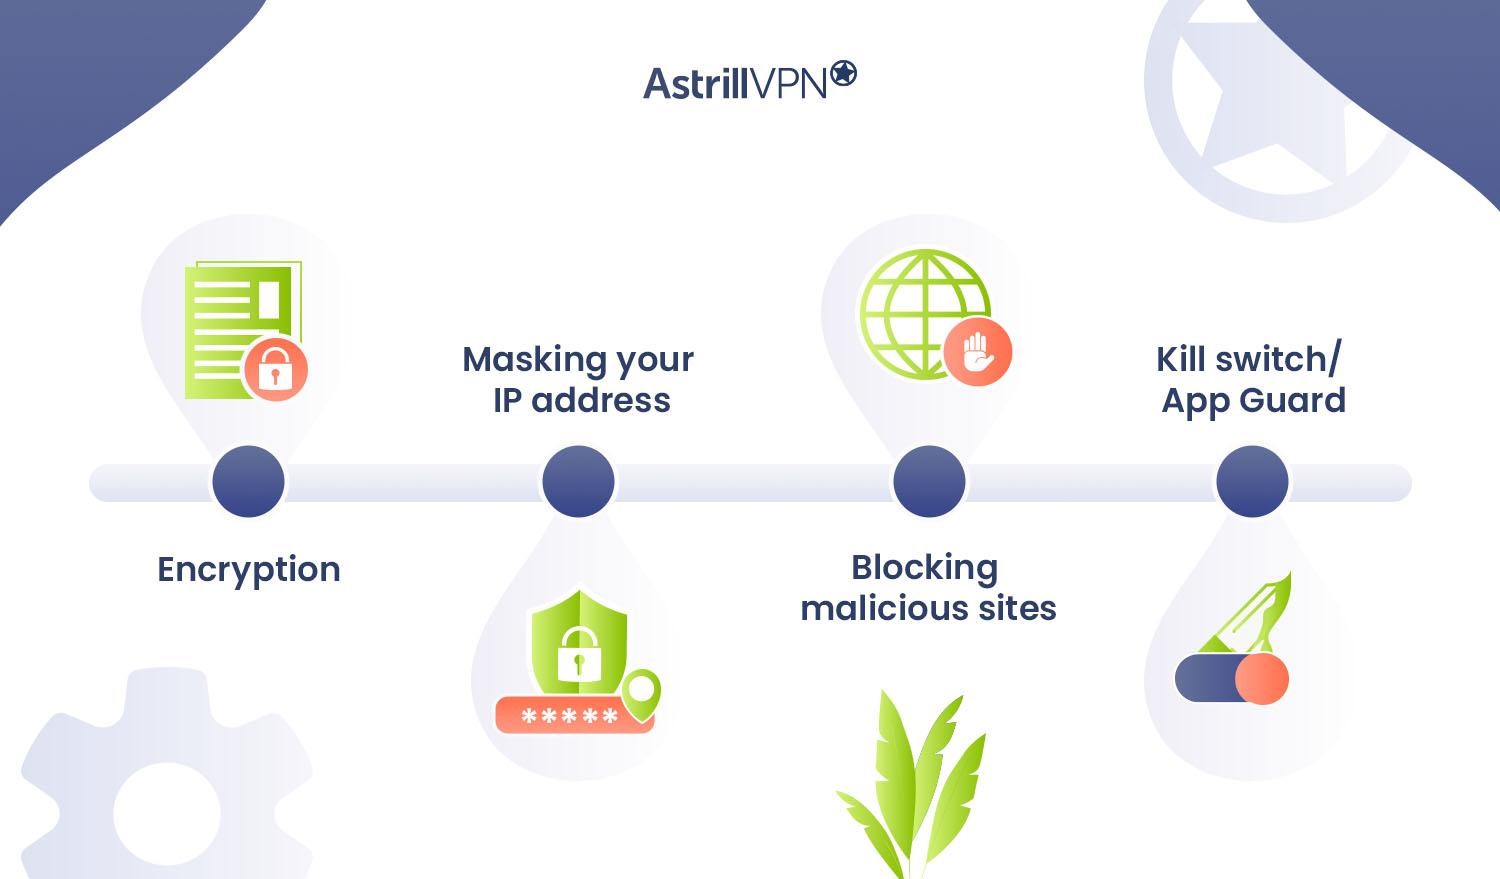 How AstrillVPN can mitigate the Security Risks Posed by a Public WiFi Connection